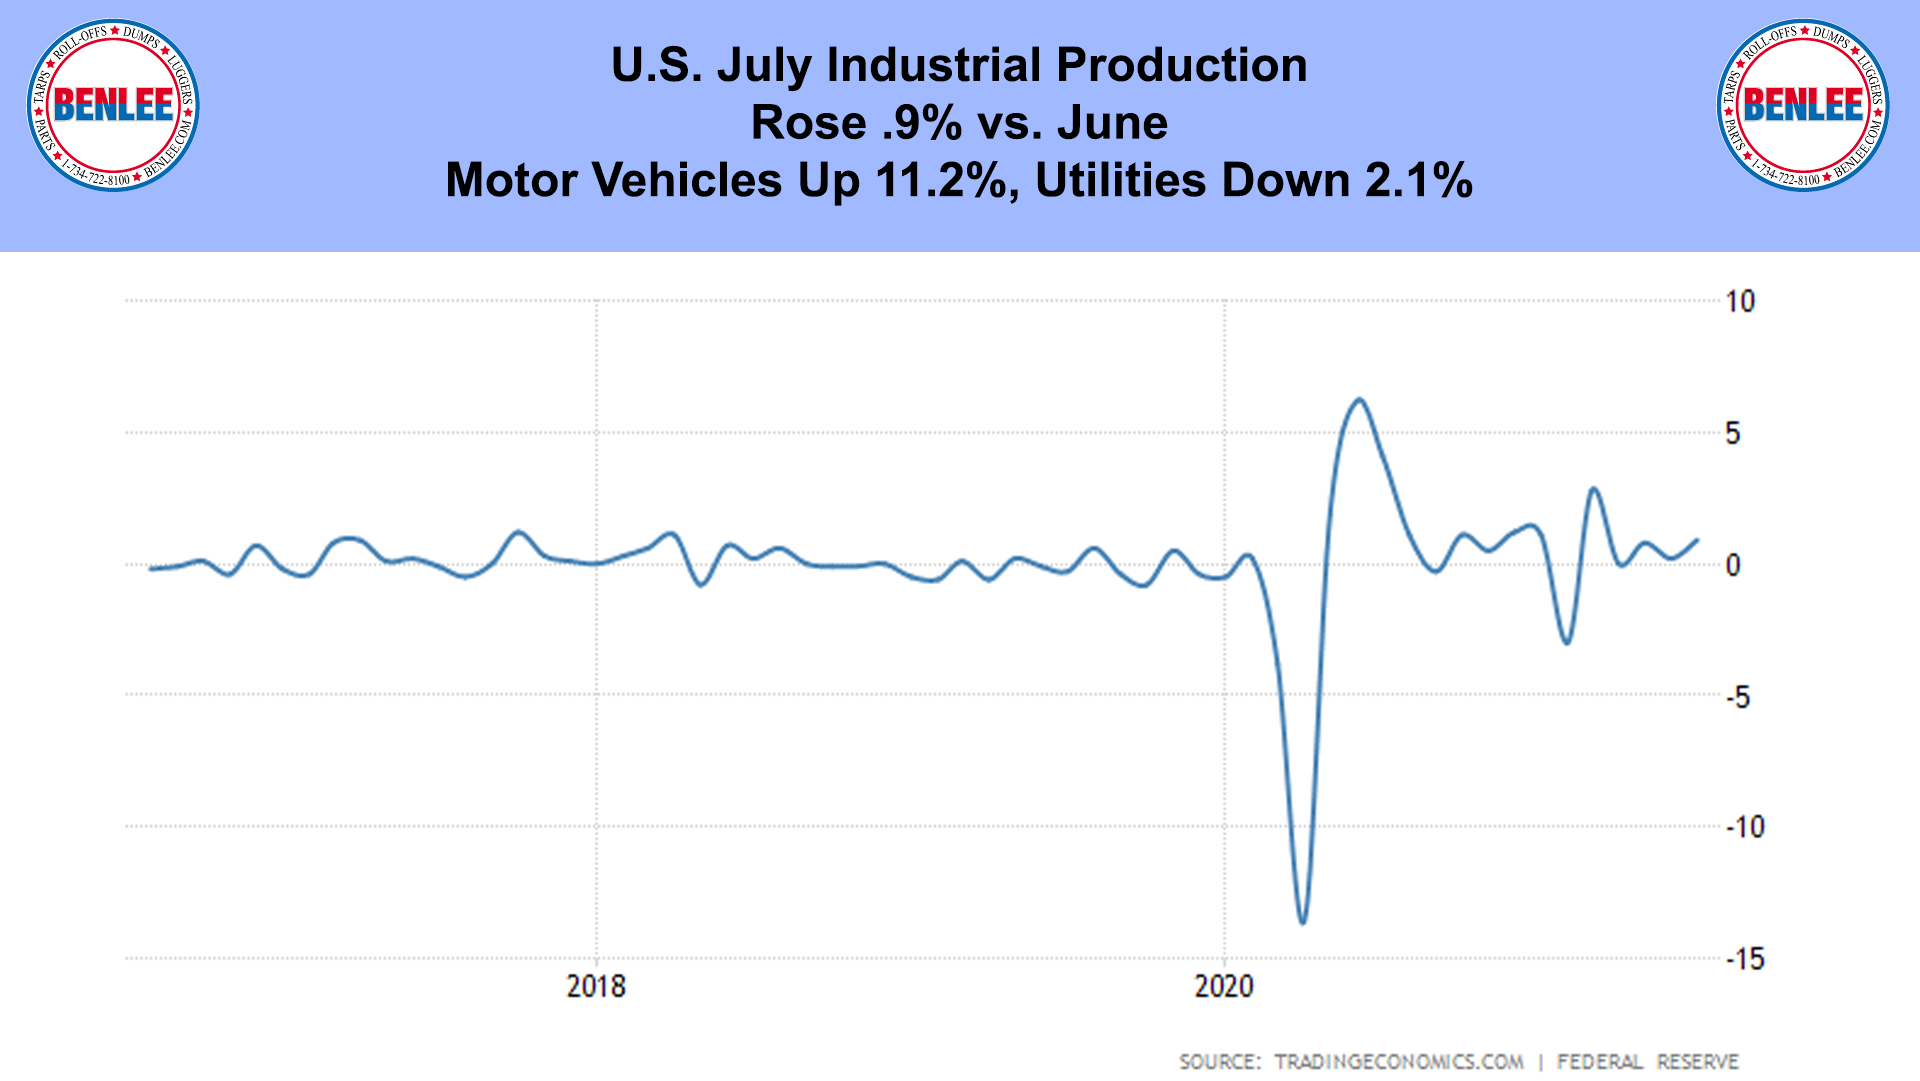 U.S. July Industrial Production